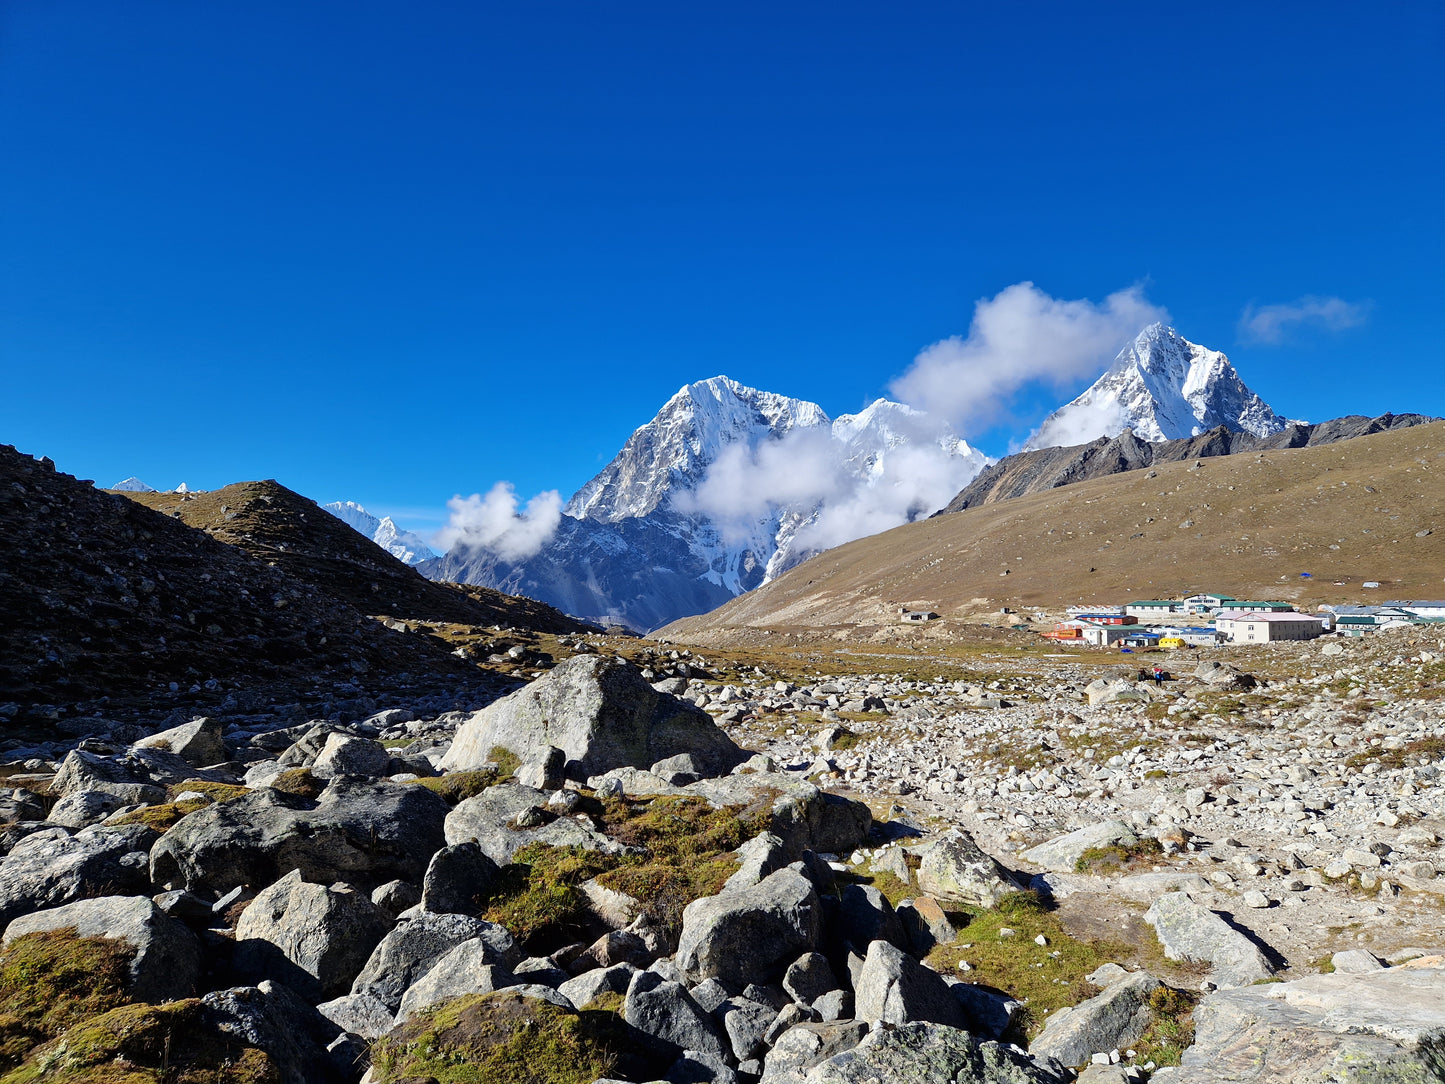 Everest Base Camp - How I trained for and trekked to the bottom of the highest mountain in the world.